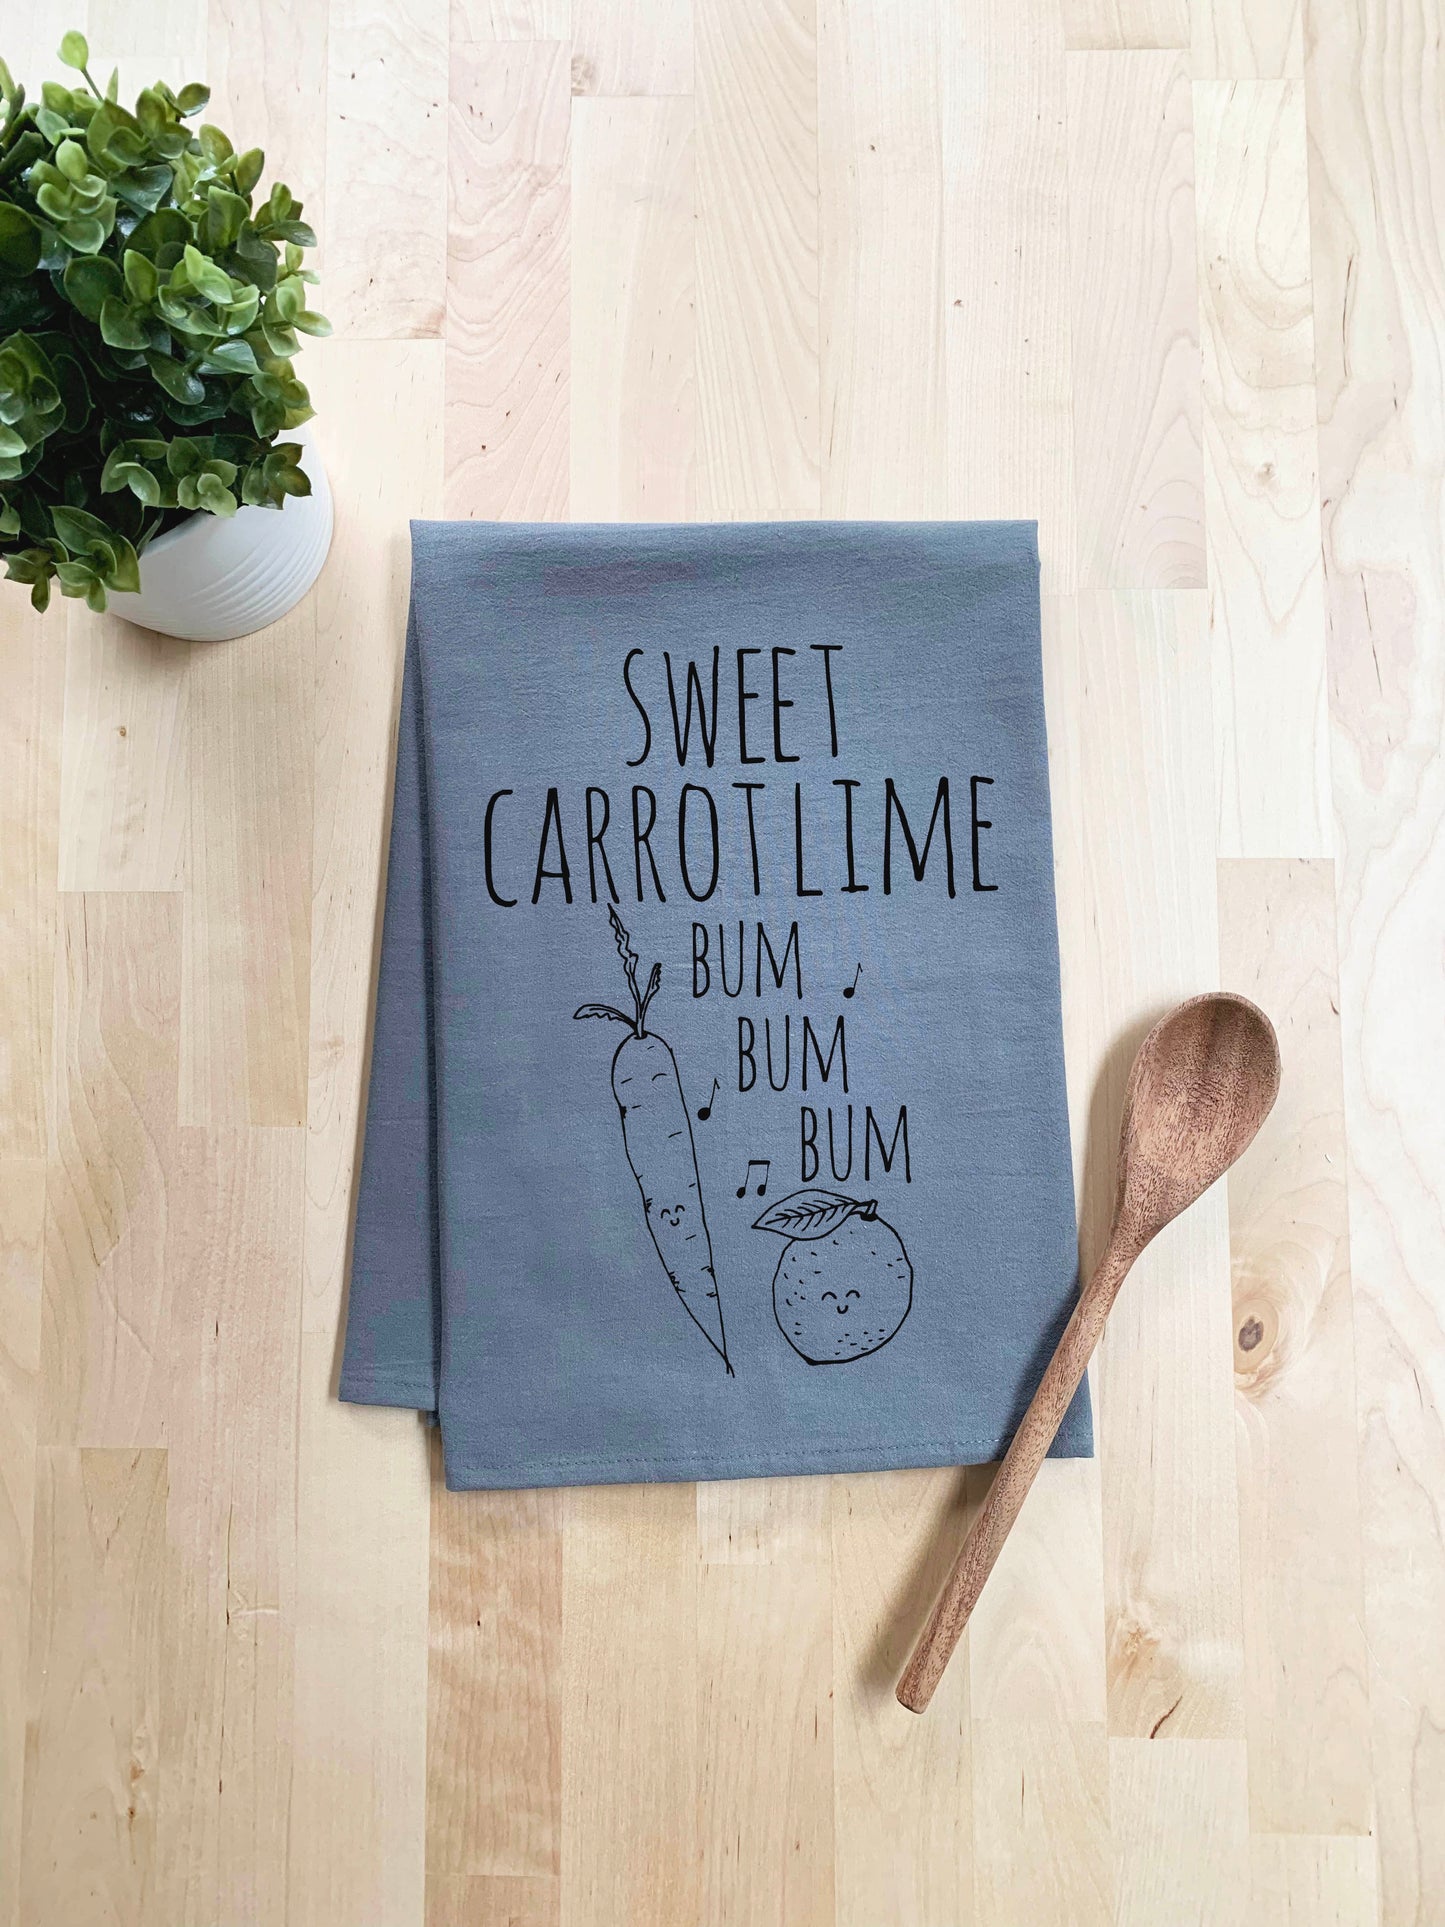 Sweet Carrot Lime Dish Towel - White Or Gray - MoonlightMakers